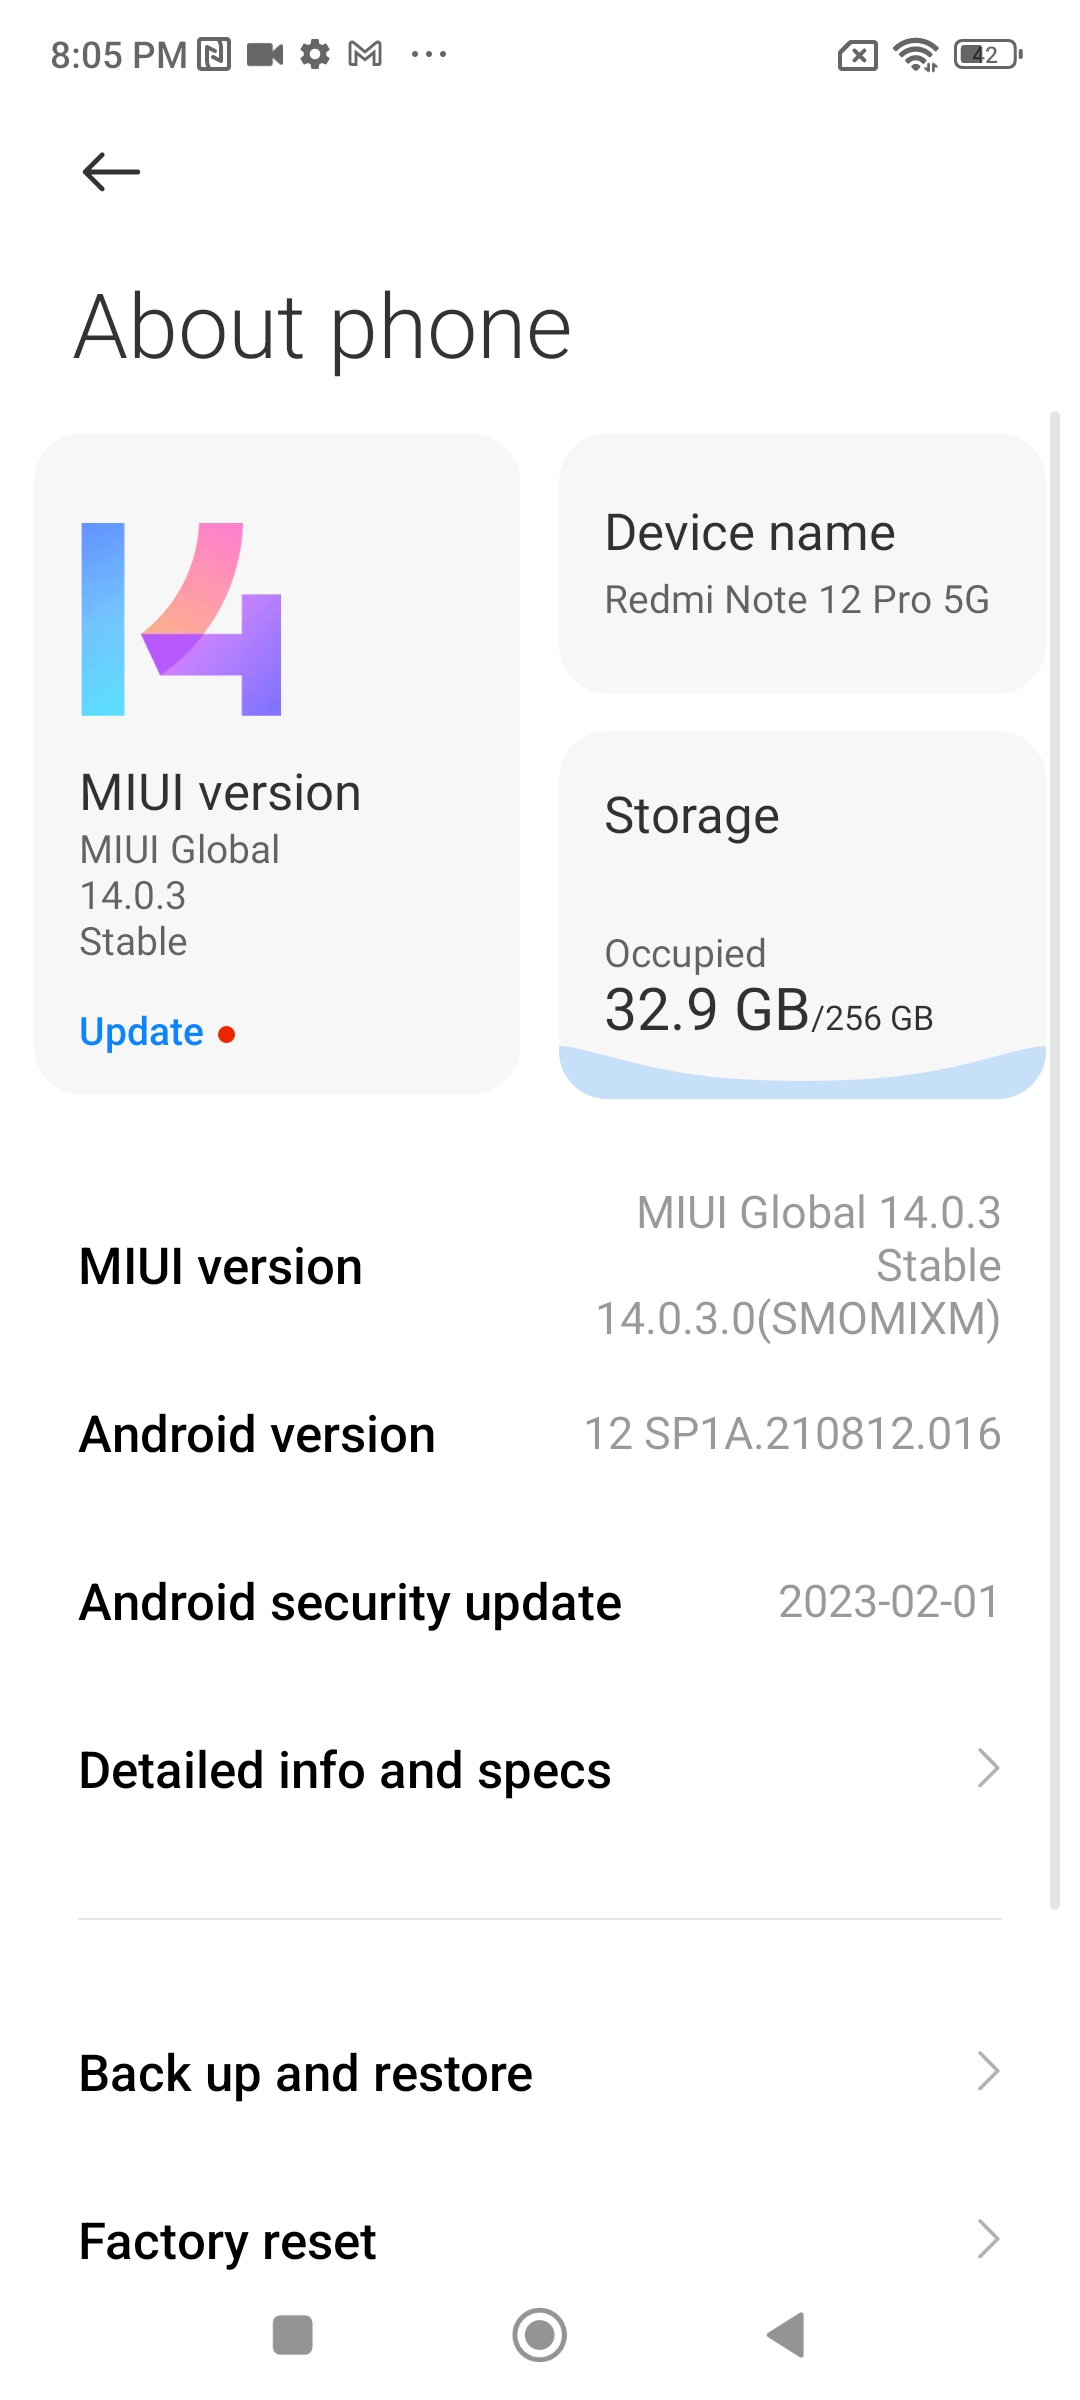 redmi note 12 pro 5g about phone